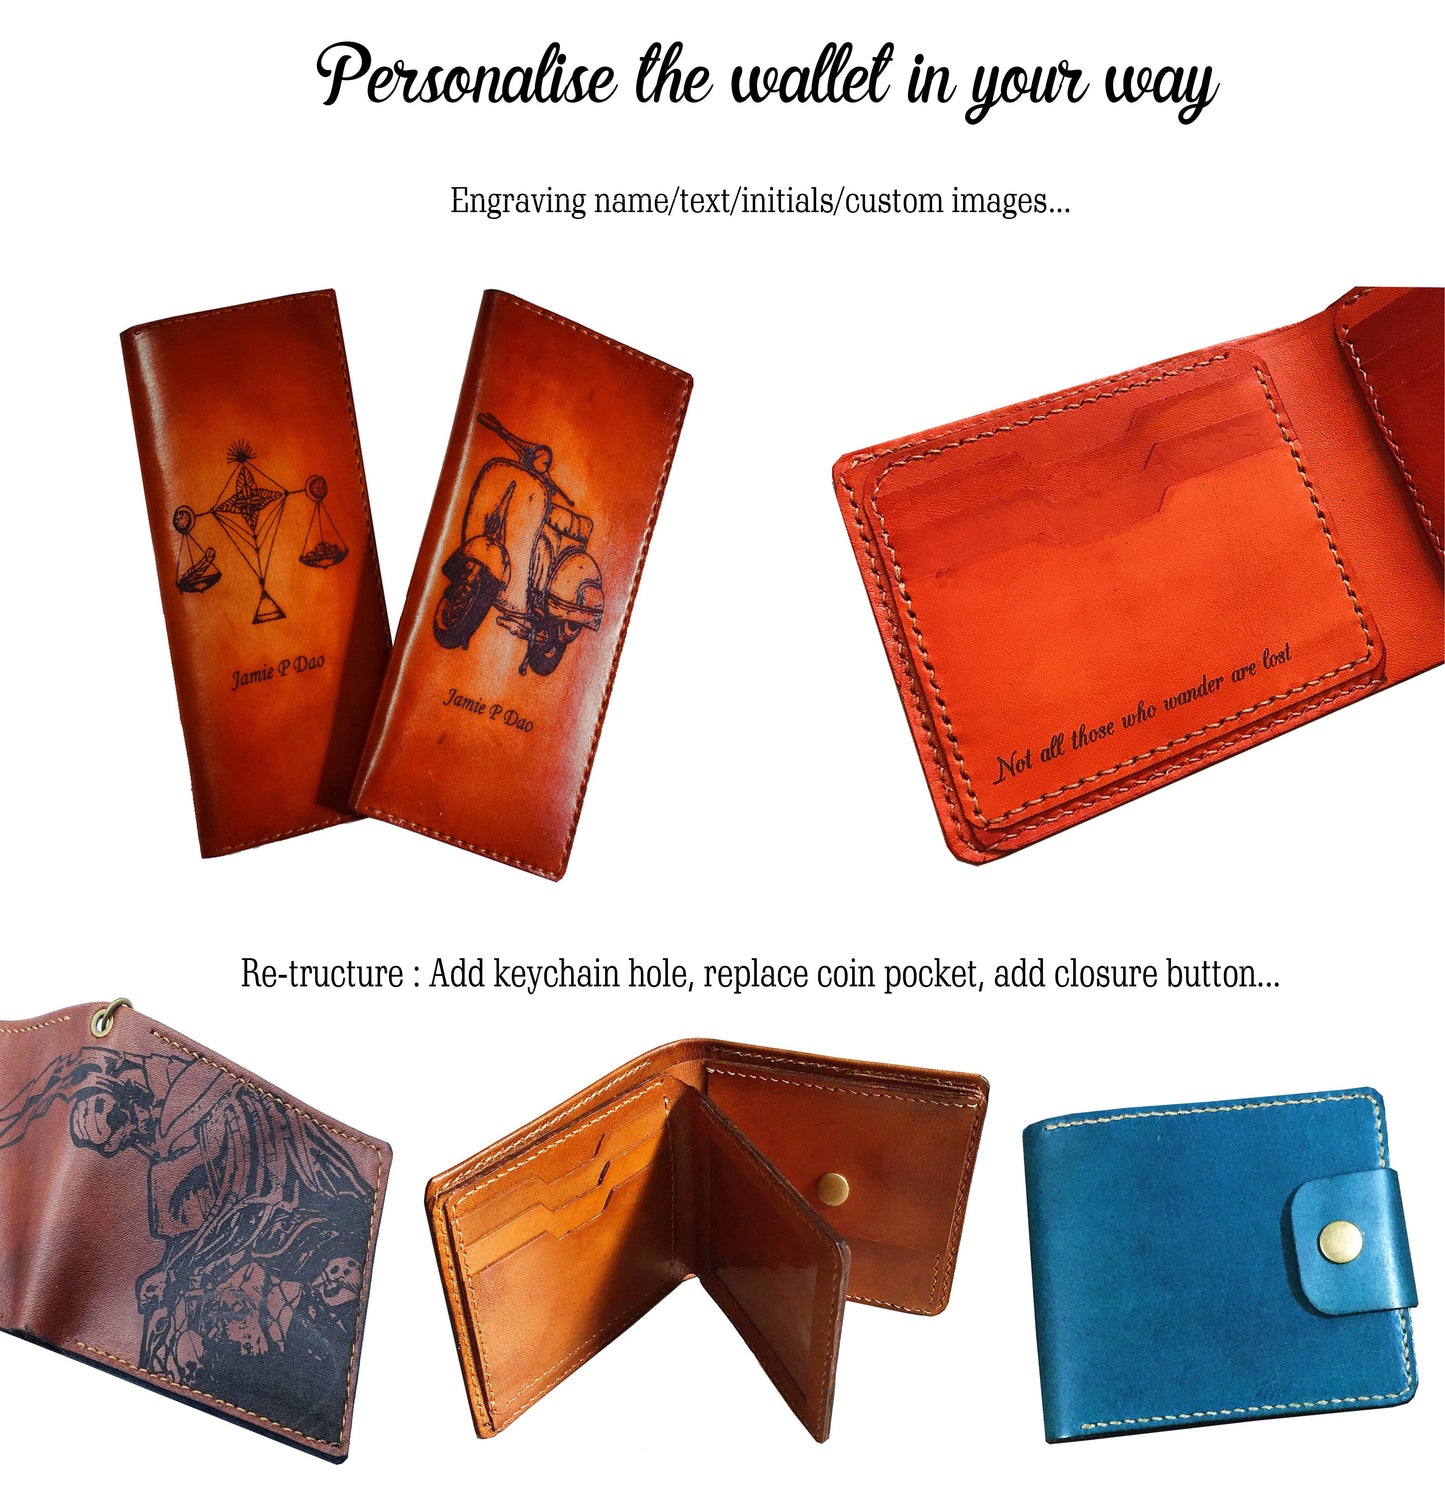 Mayan Corner - One Piece anime leather wallet, bifold anime wallet, custom leather gift for boyfriend, cool wallet for father, husband